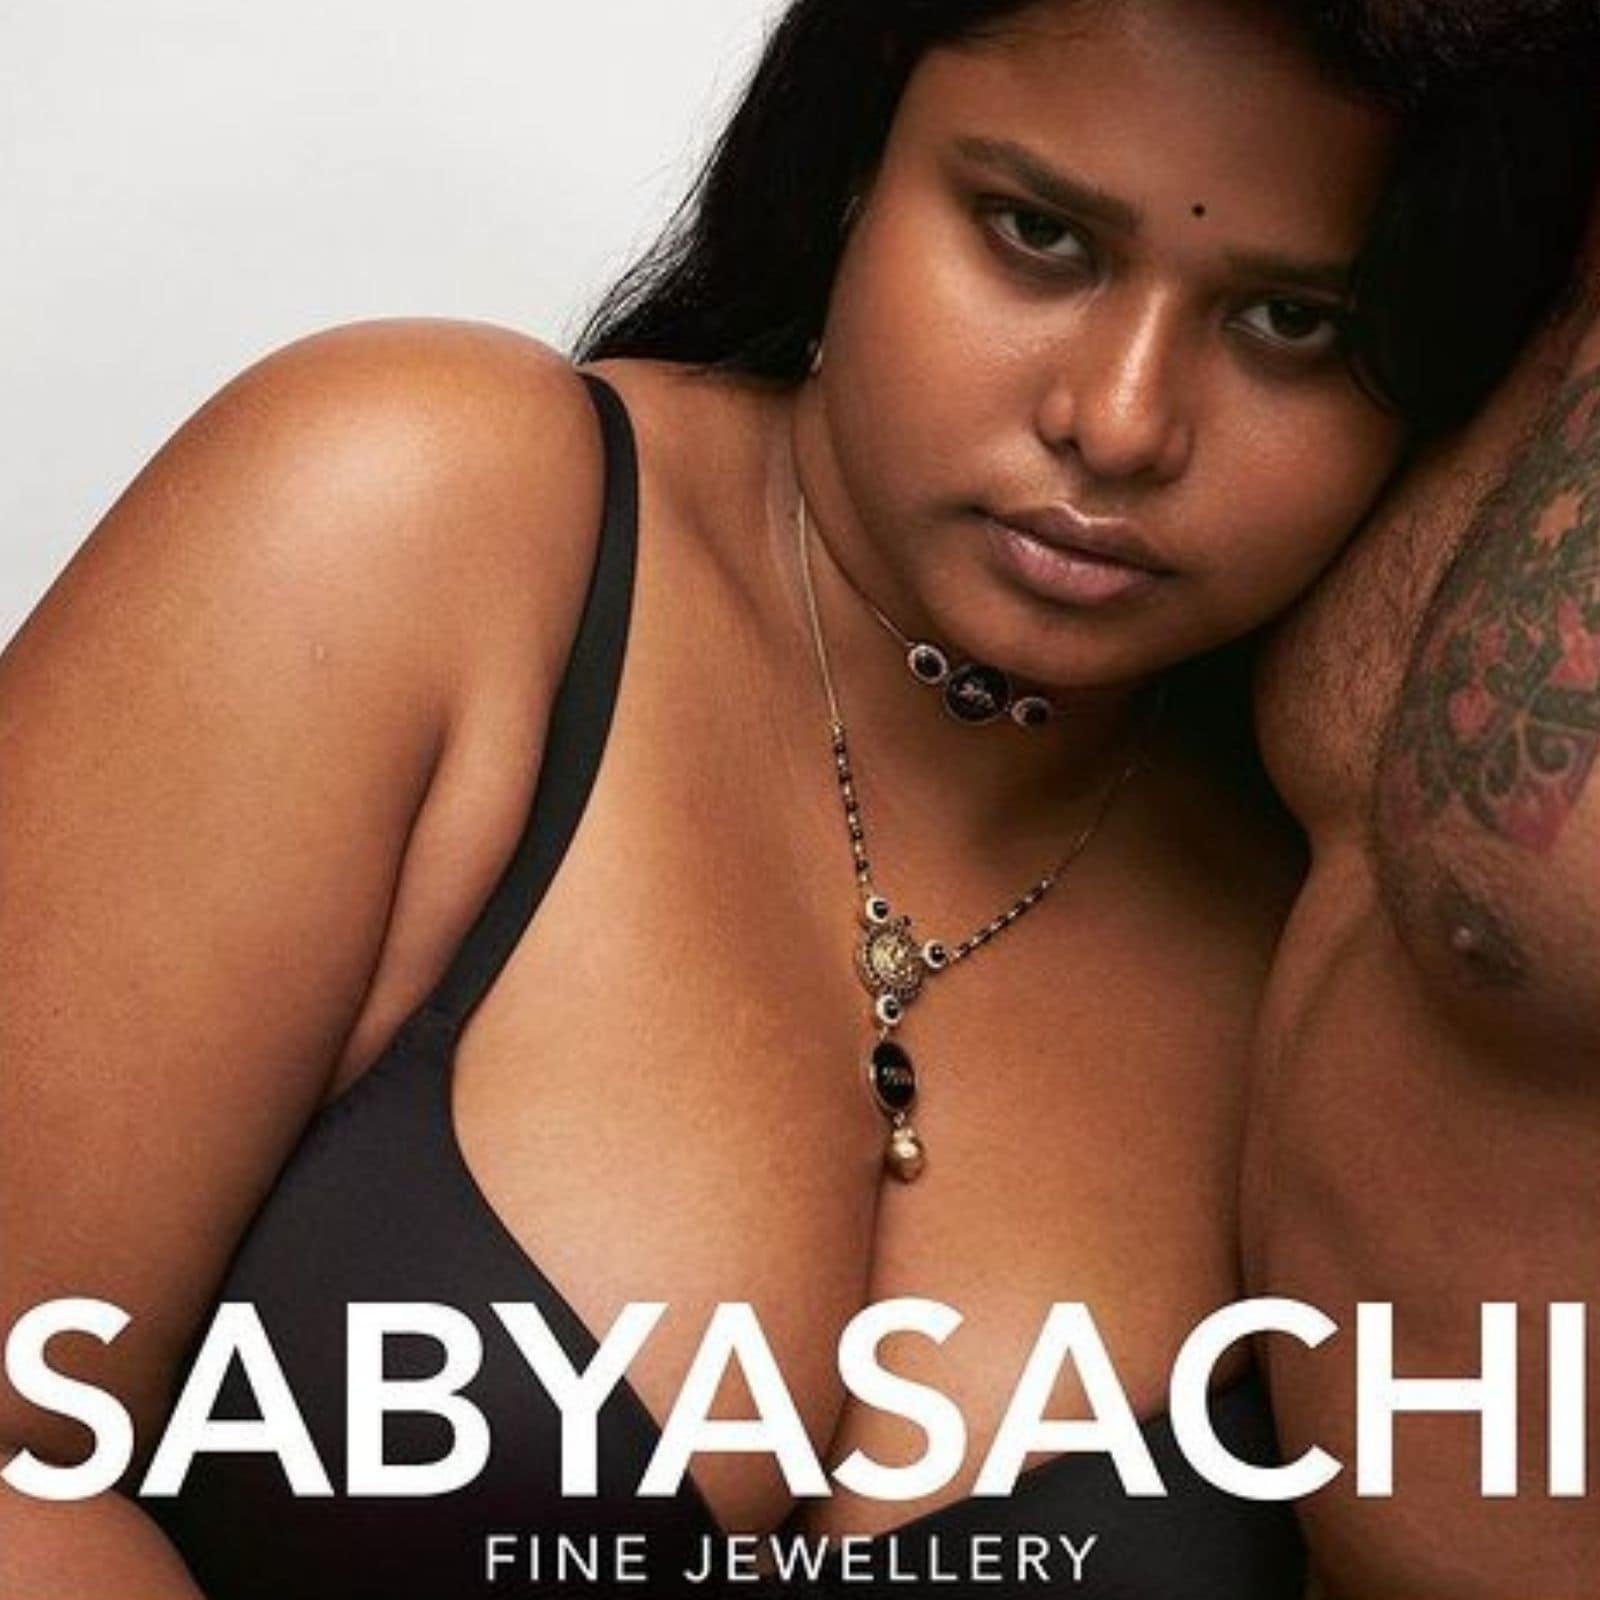 Meena Sex Tamil Heroine - Sabyasachi's New Campaign Faces Flak For Featuring Mangalsutra as 'Fashion  Jewellery' - News18